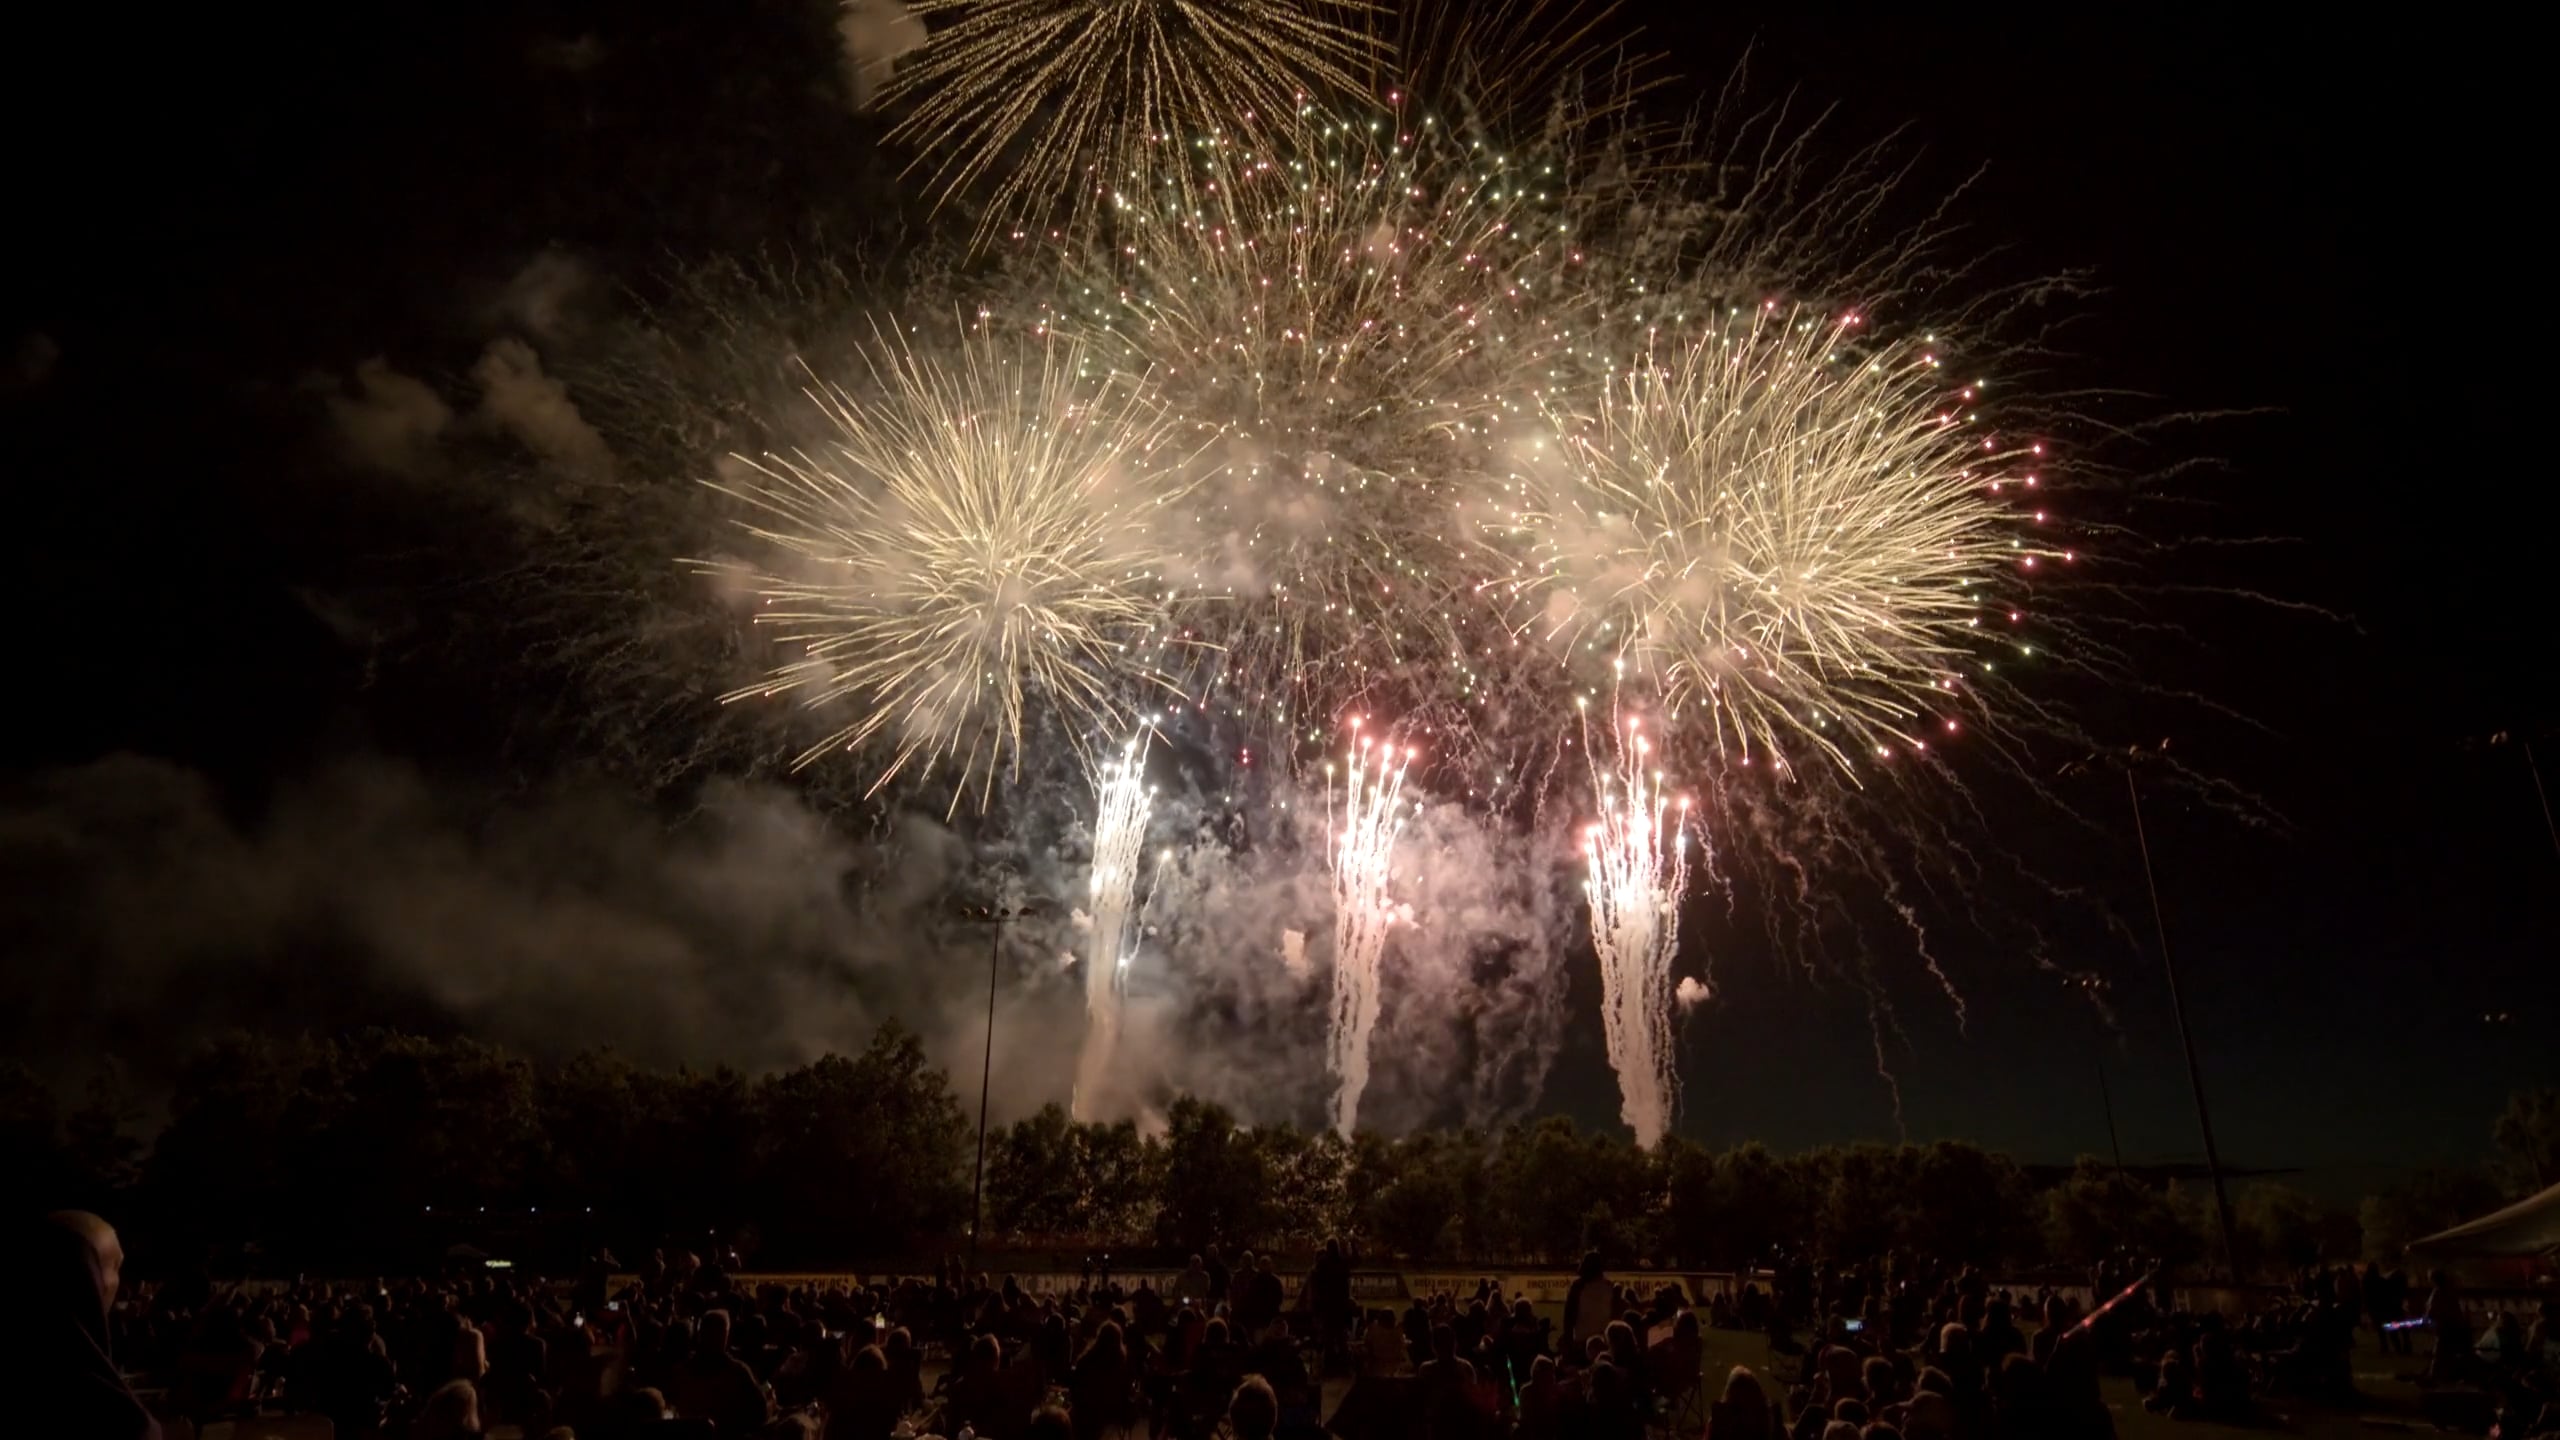 Shelby Township Fireworks and Drone Show Presented by Signs365 on Vimeo